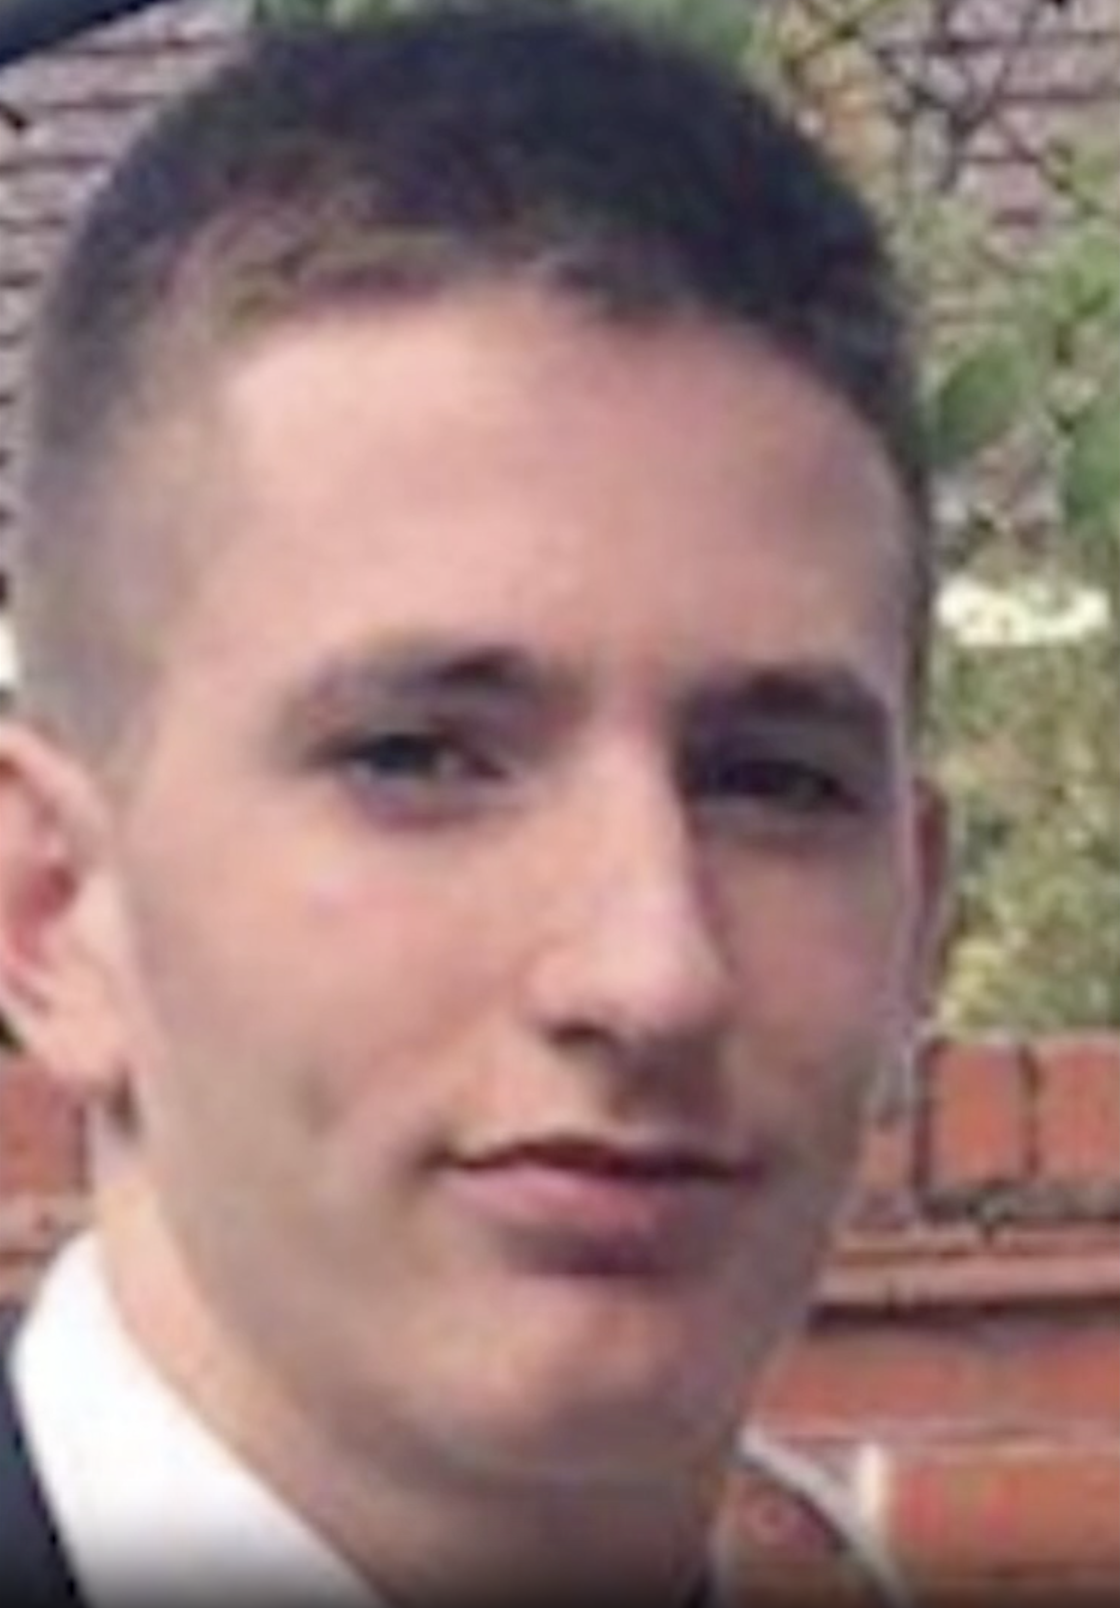 Luke O'Connor was stabbed to death at the age of 19